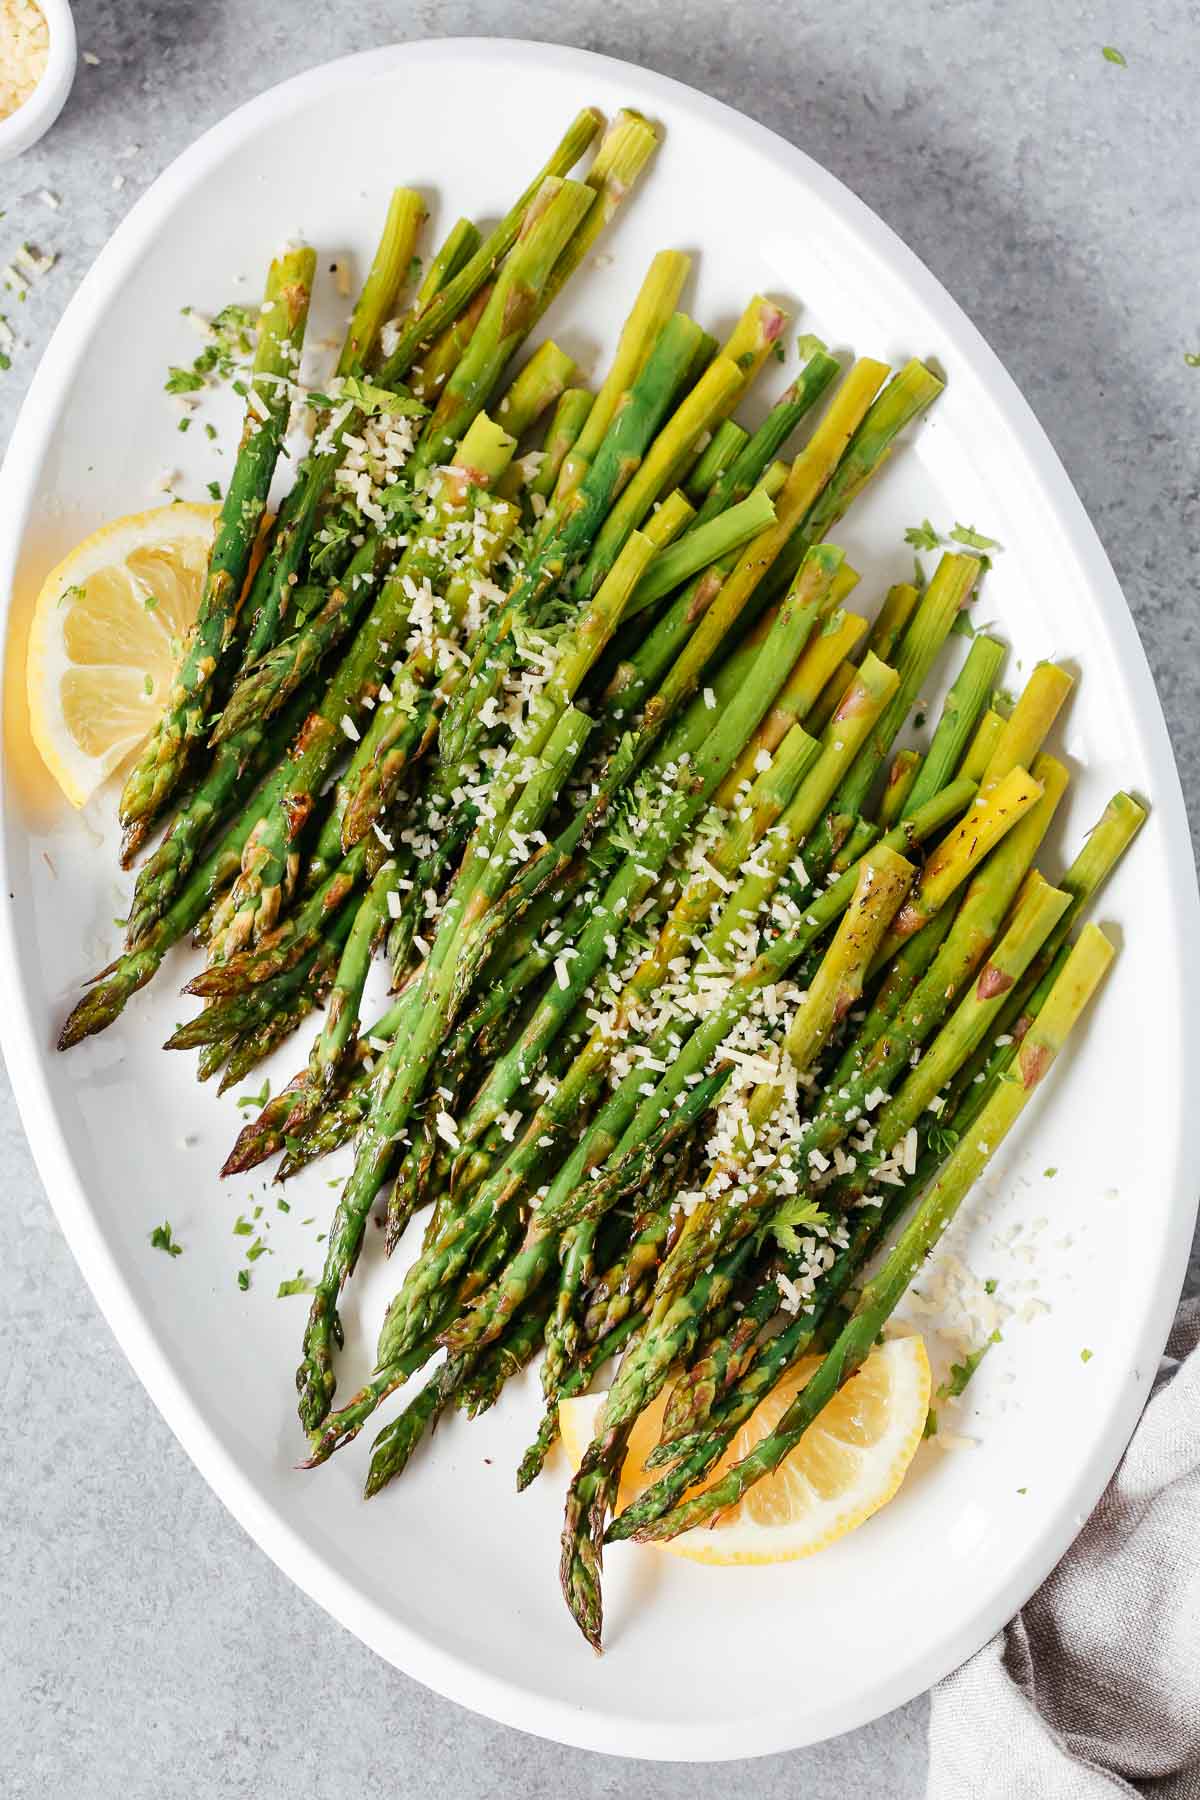 Roasted asparagus on a serving platter topped with parmesan cheese and lemon wedges.